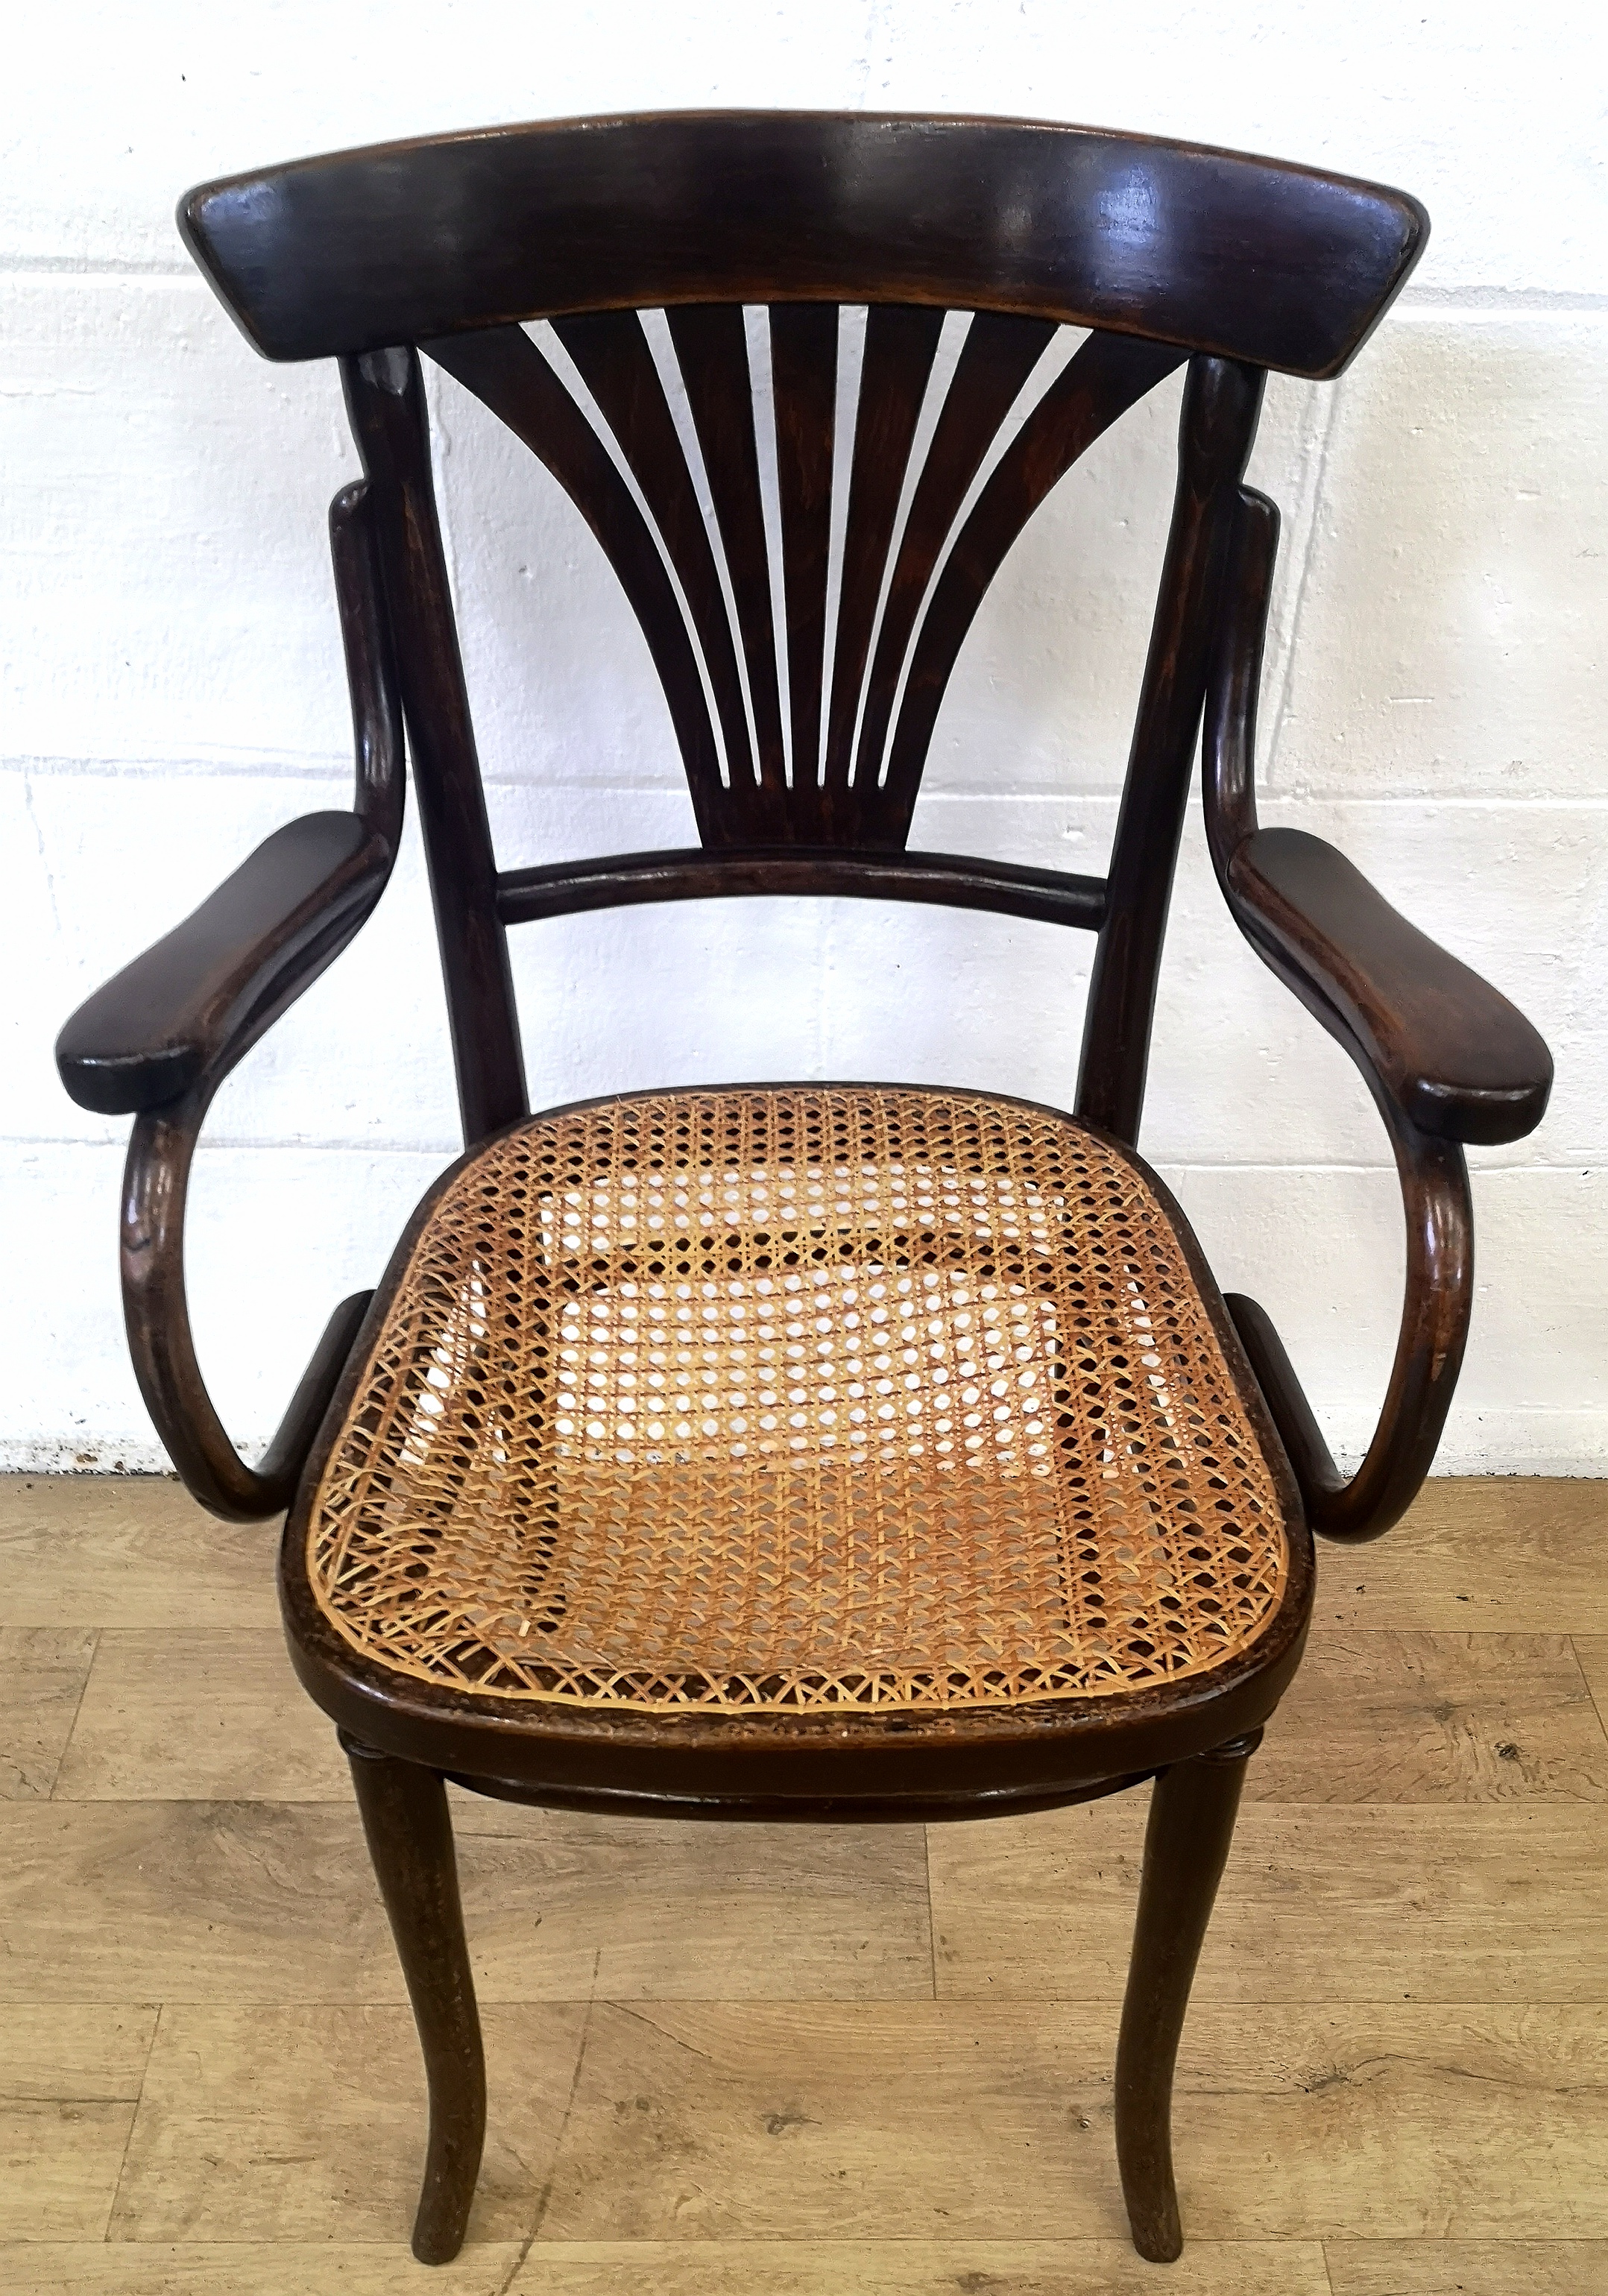 Pair of bentwood open armchairs - Image 2 of 5